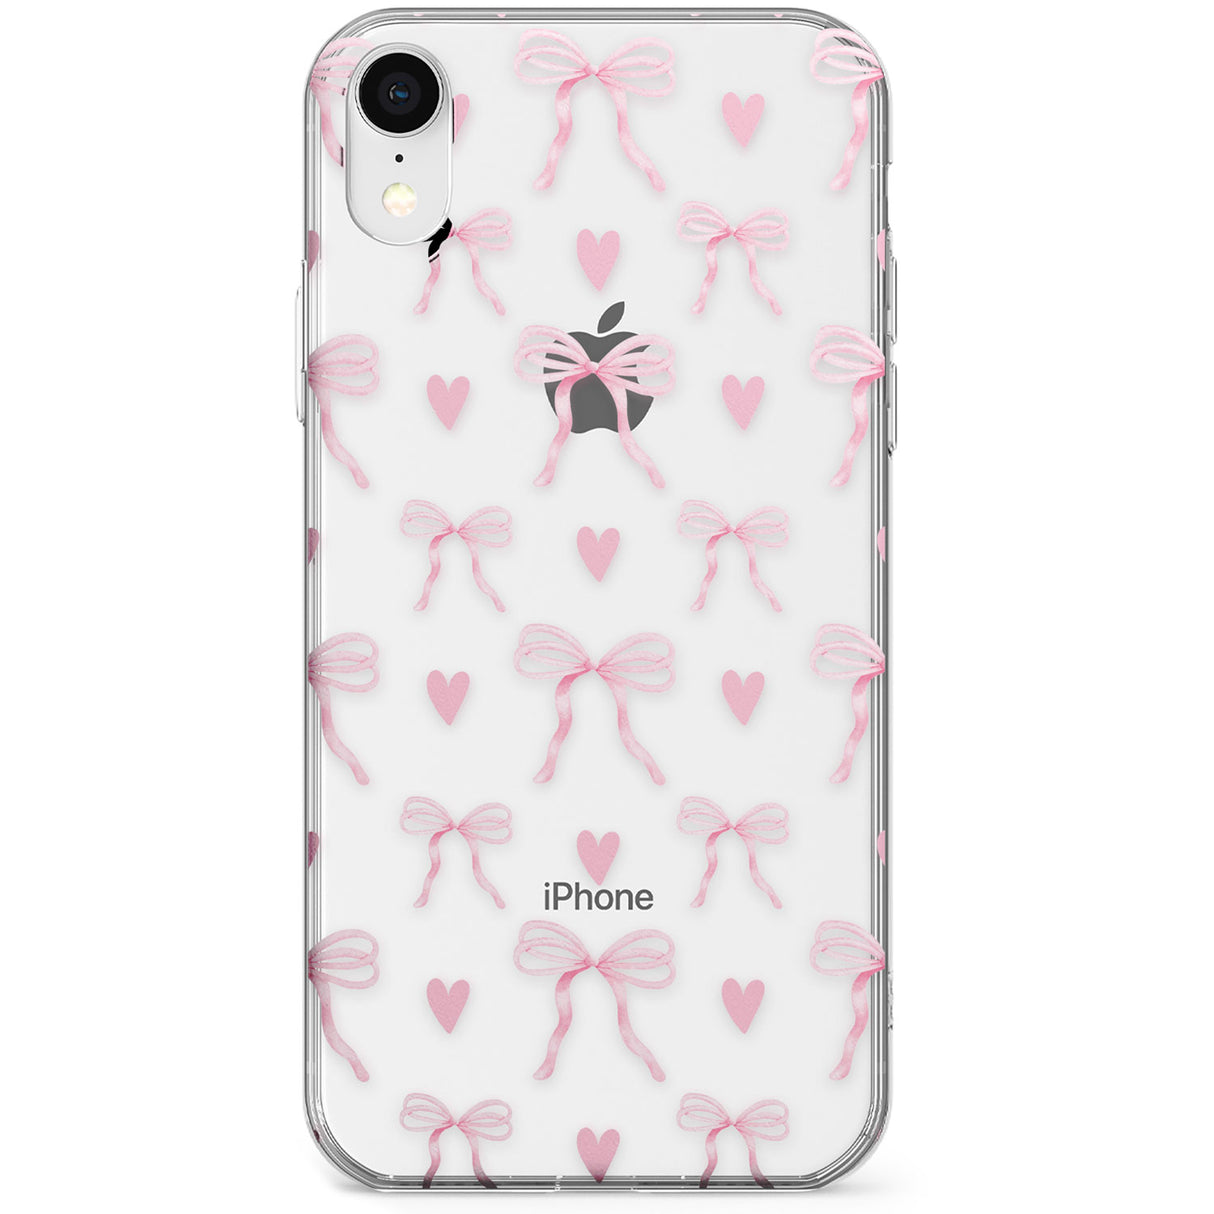 Pink Bows & Hearts Phone Case for iPhone X, XS Max, XR